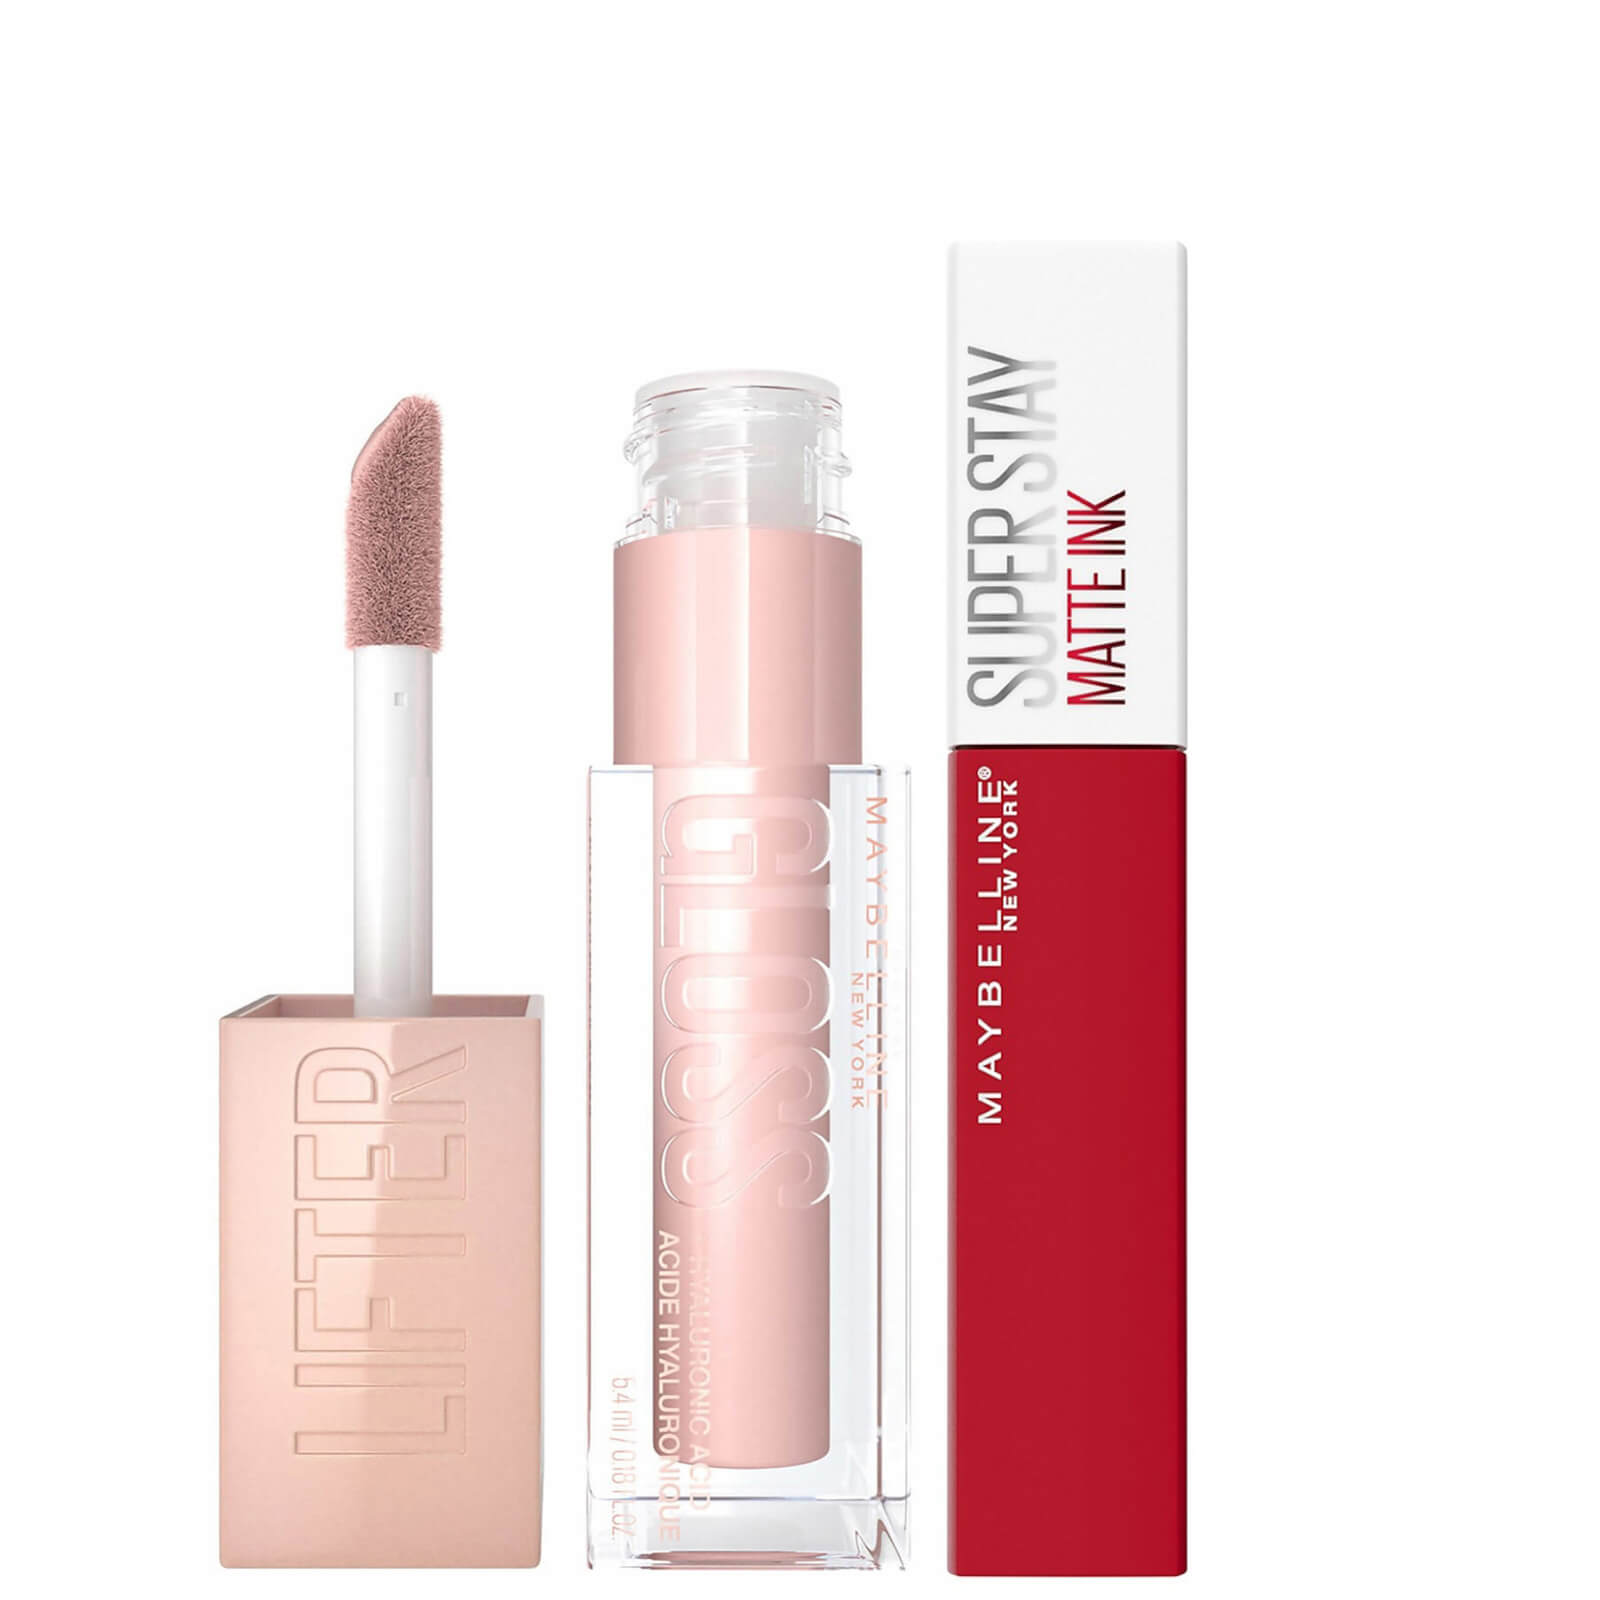 Maybelline Lifter Gloss and Superstay Matte Ink Lipstick Bundle (Various Shades) - 325 Shot Caller